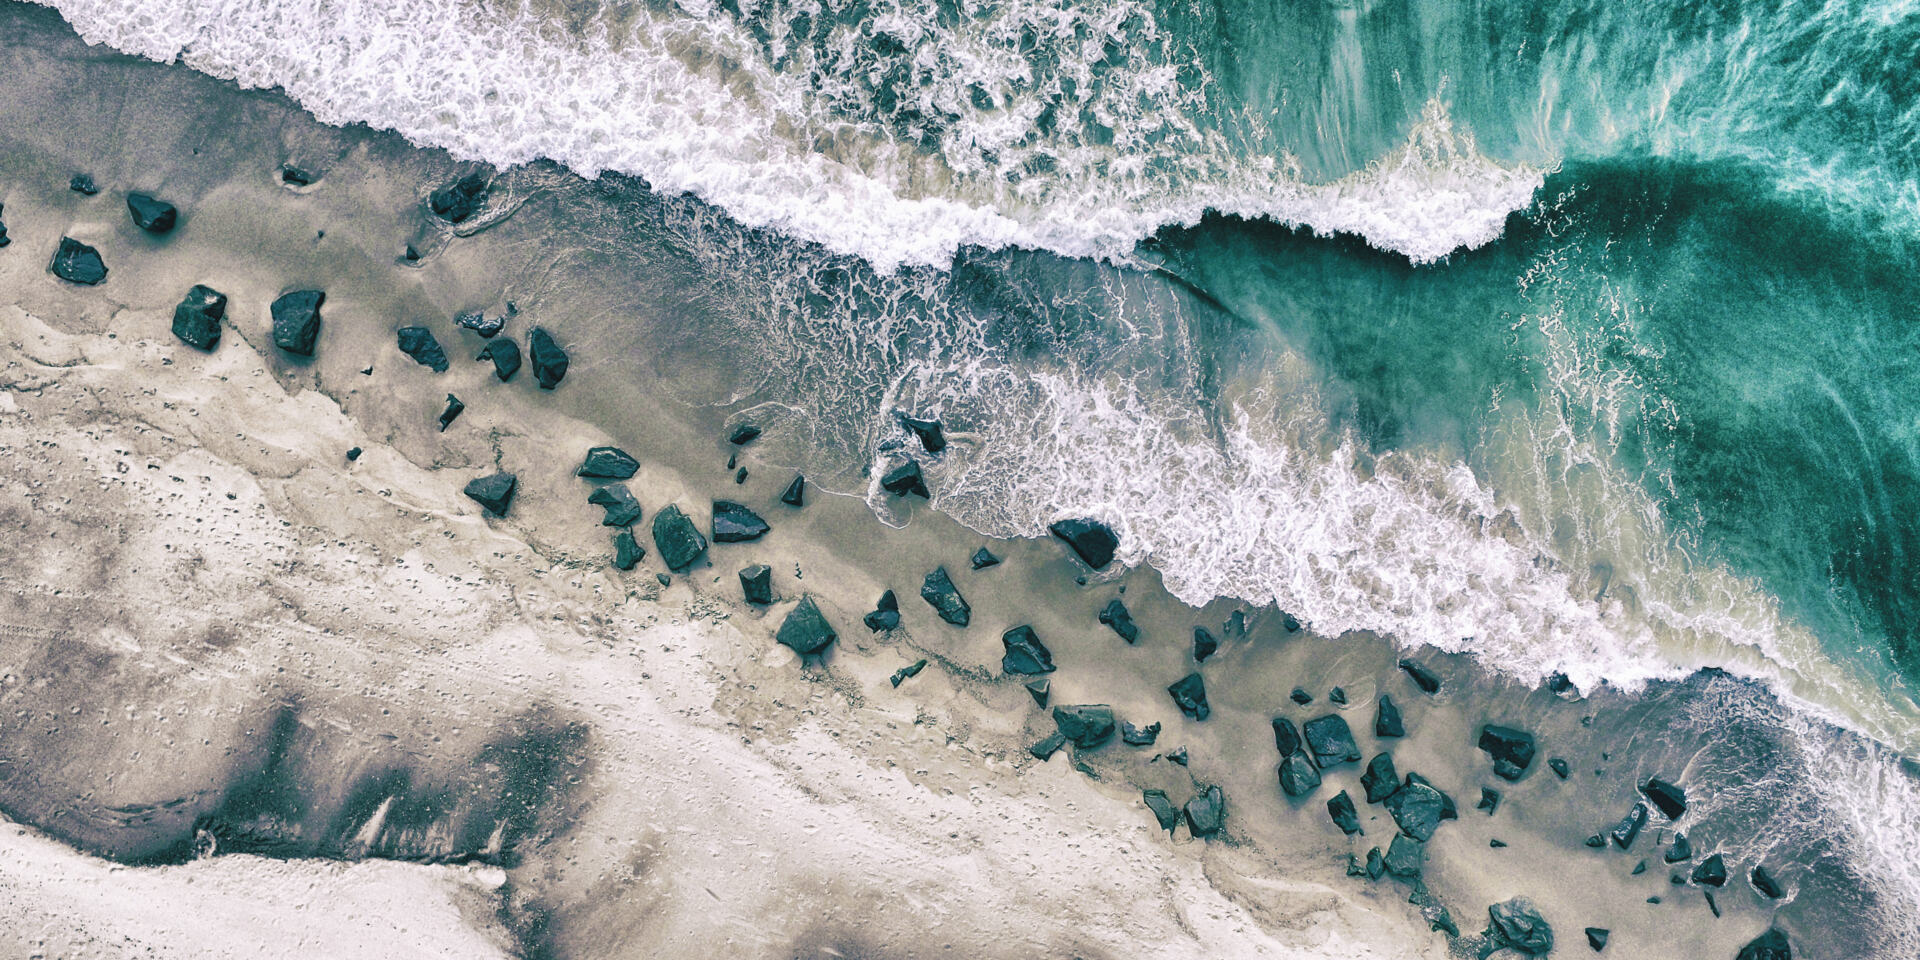 The sea with waves and ripples and the shore with rocks. This image was photographed from above with a drone.